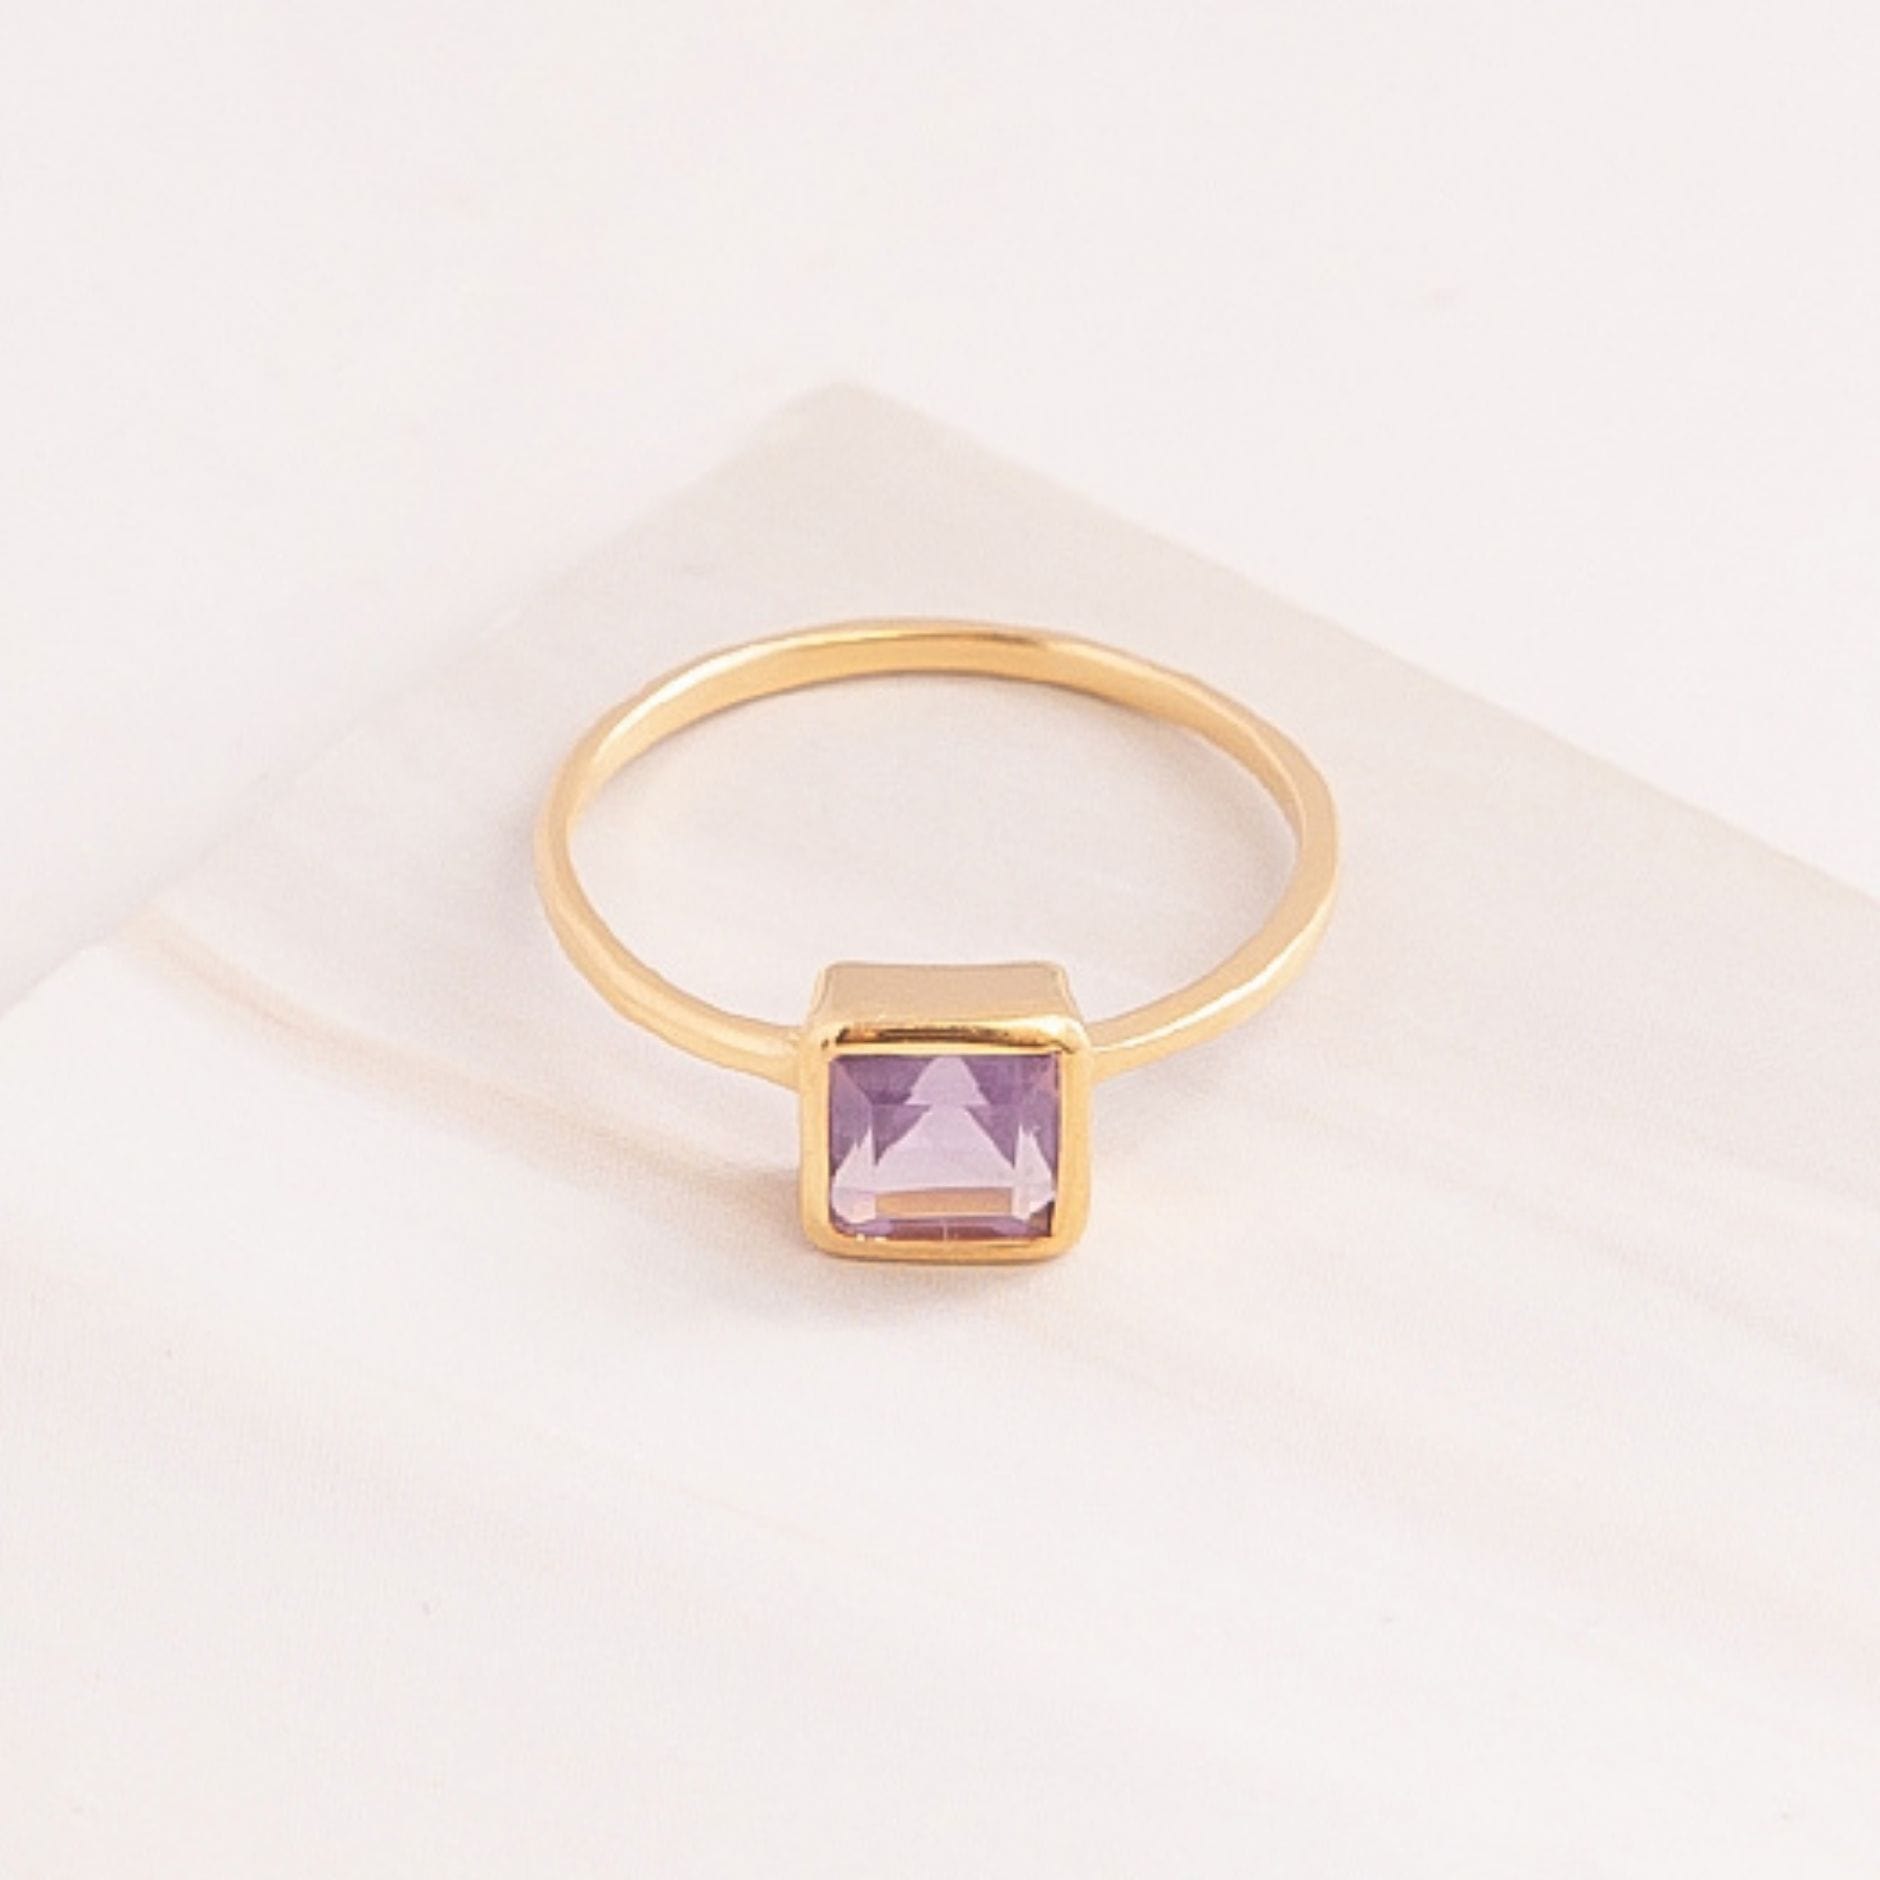 Emblem Jewelry Rings Purple Amethyst / Square Signature Candy Gemstone Stack Rings (Ring Size 4)